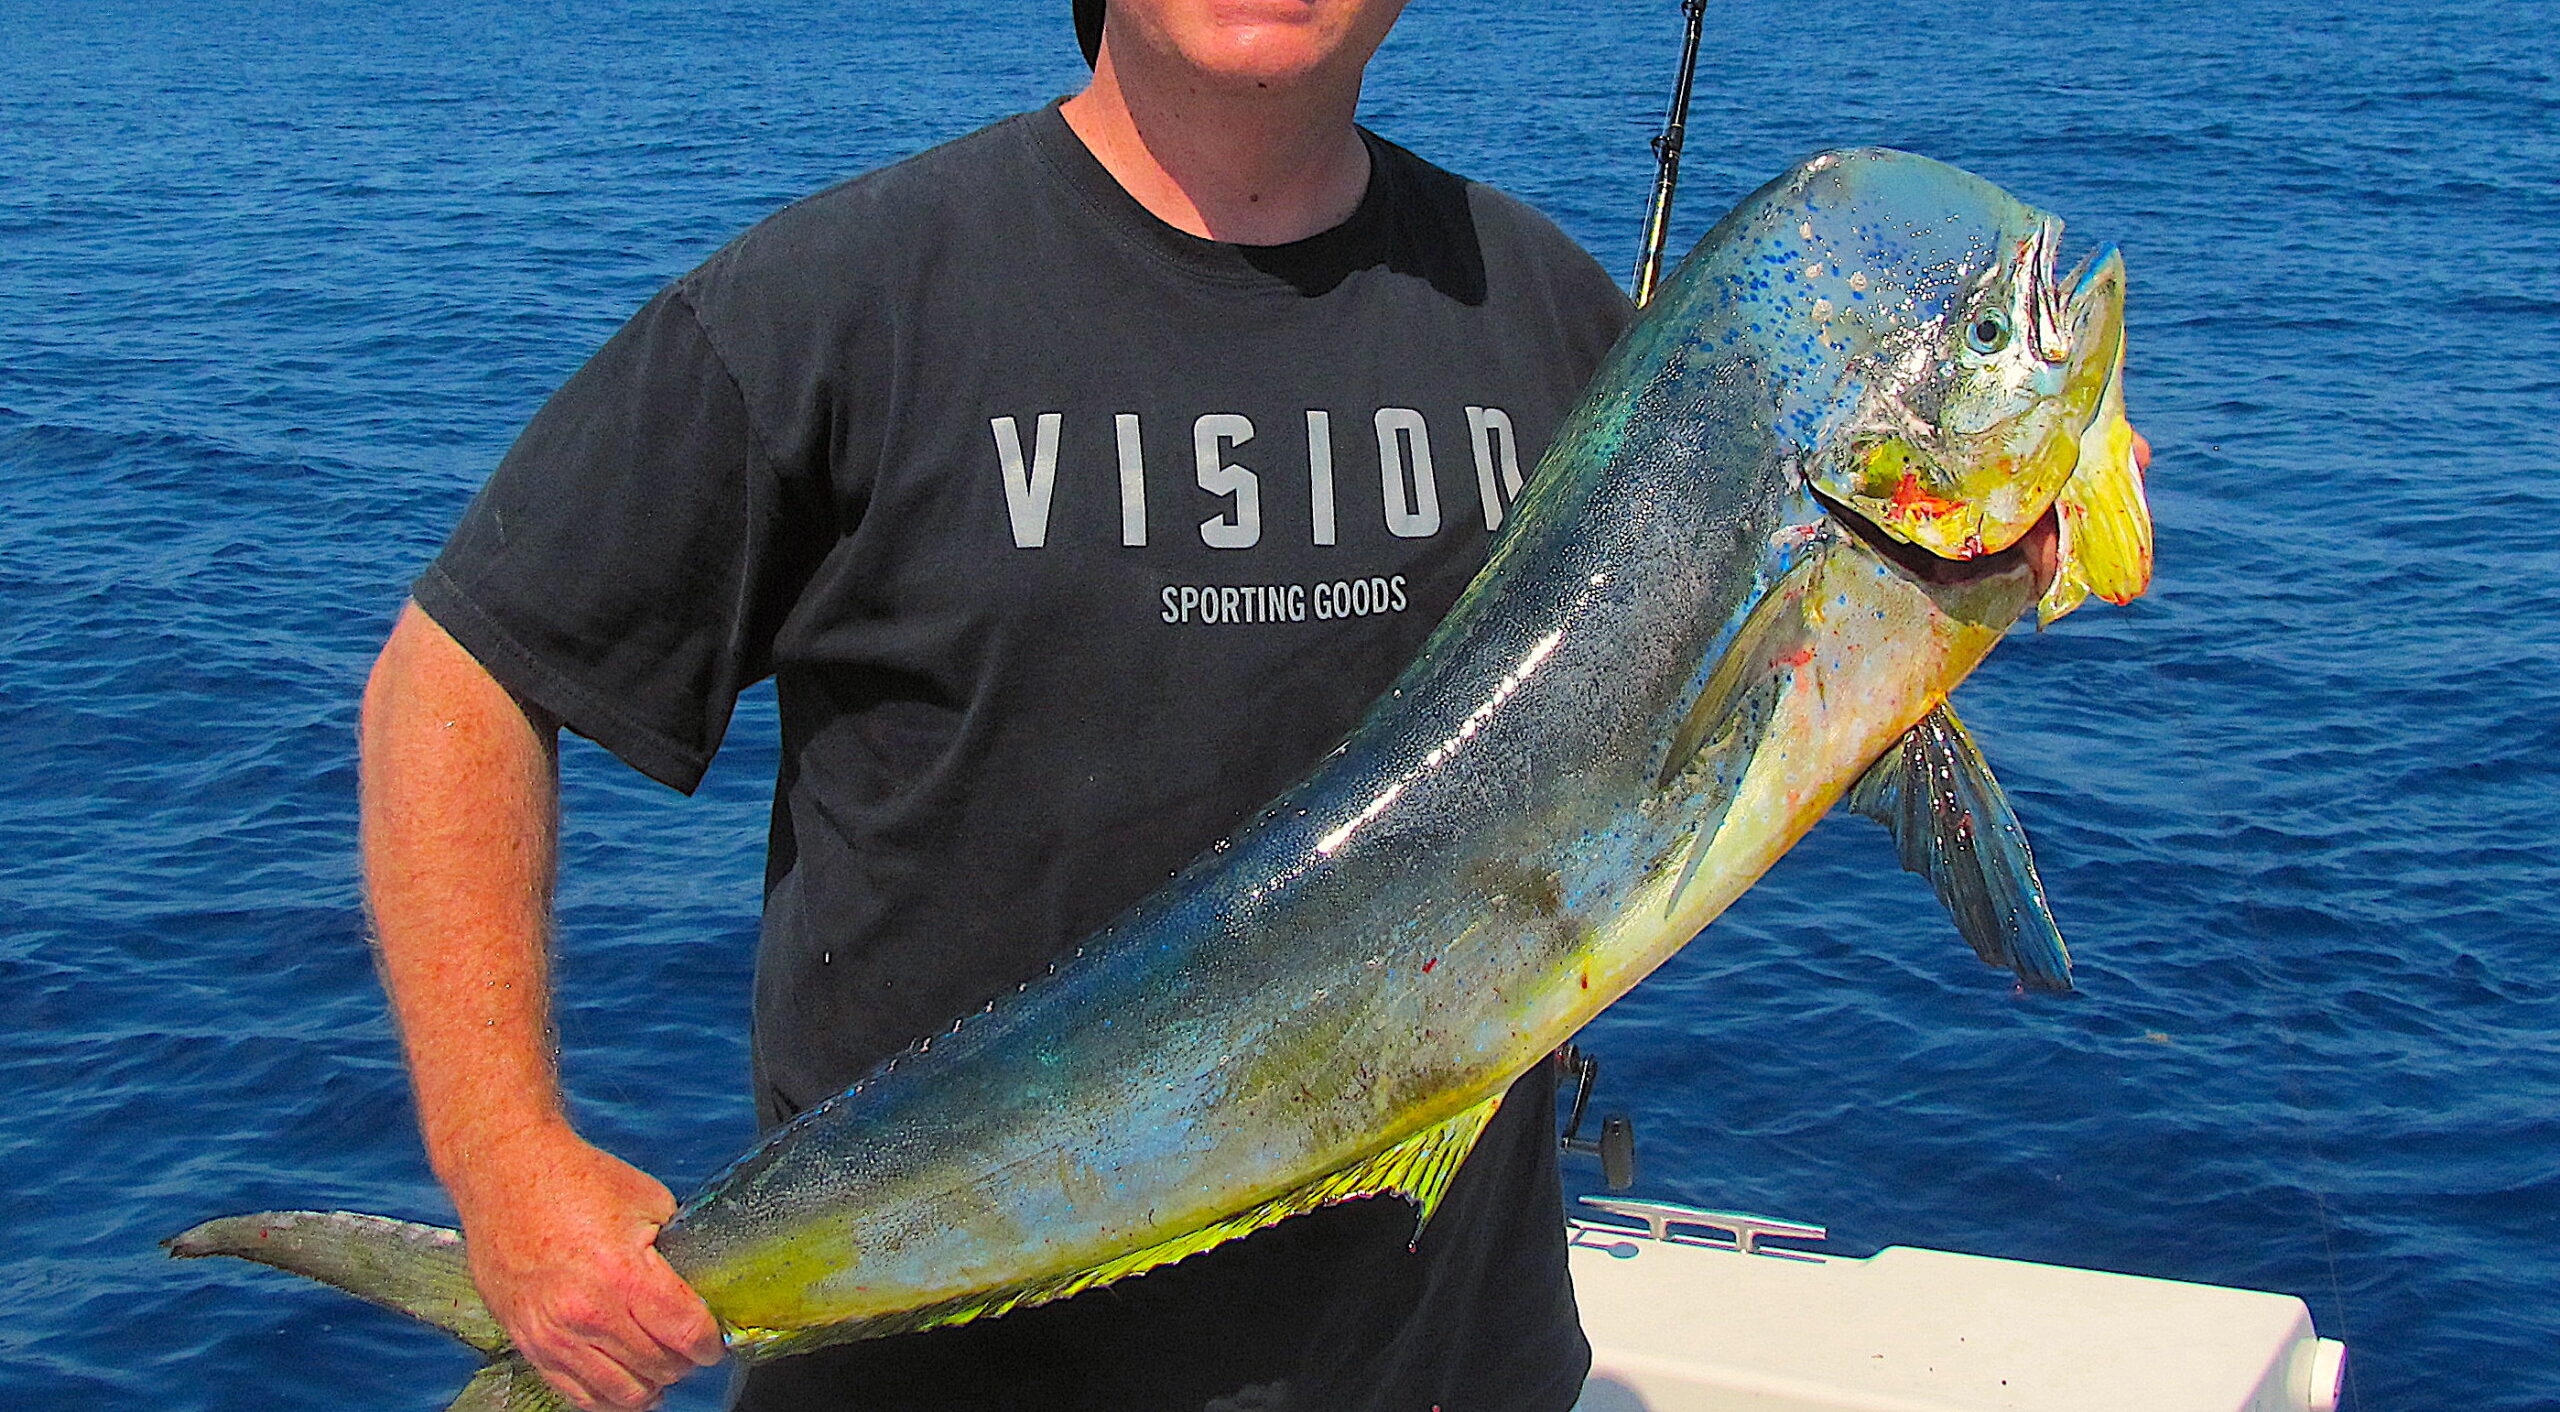 dolphinfish, caught off Hatteras.